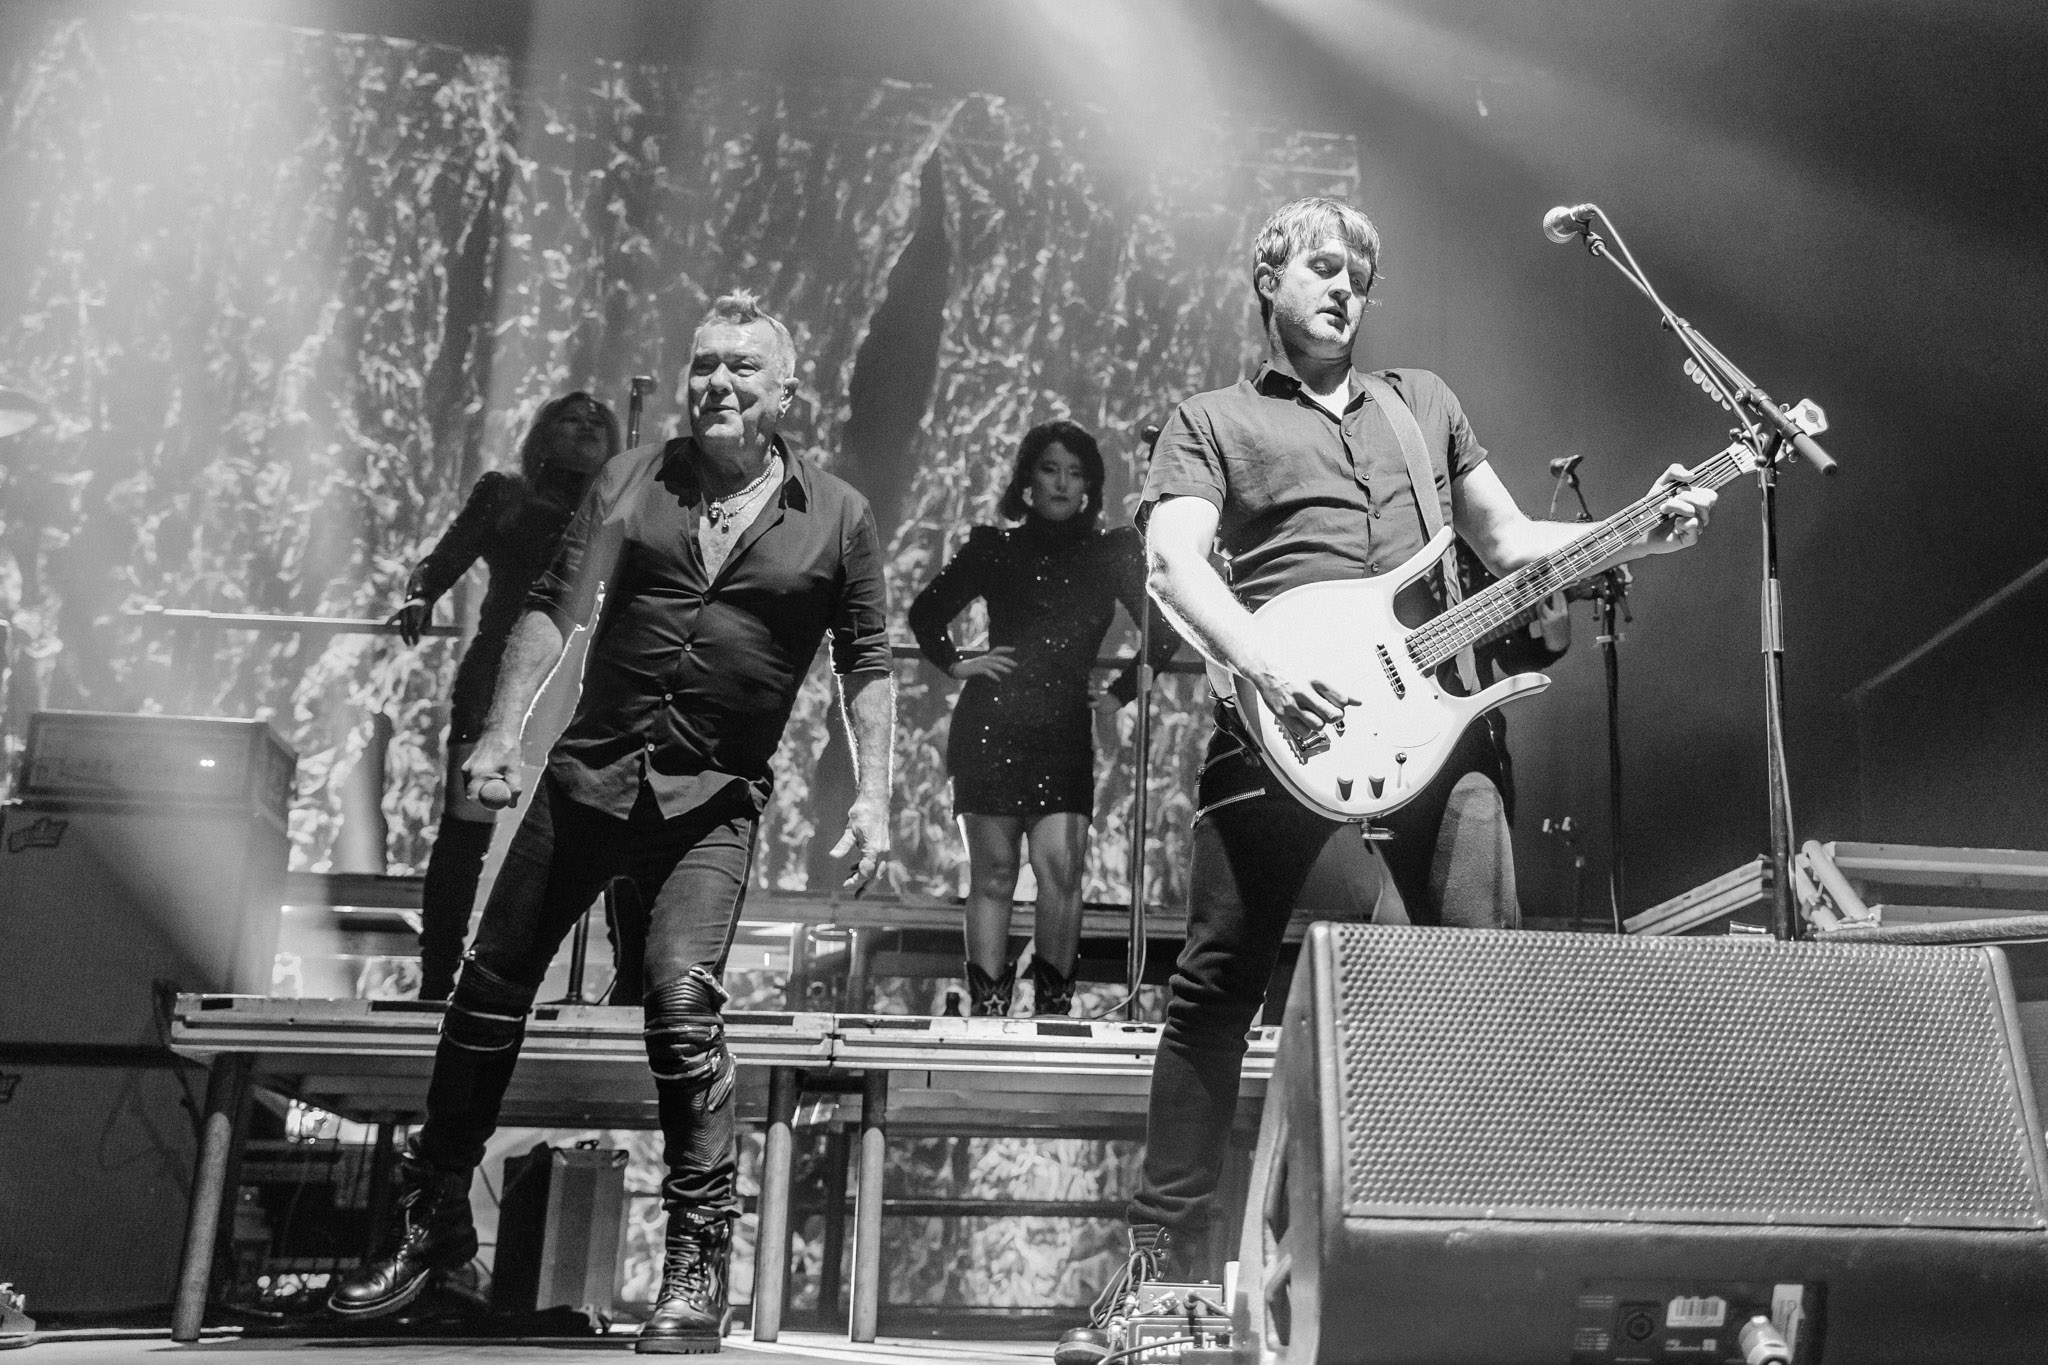 Concert Review Jimmy Barnes, Auckland New Zealand, 2019